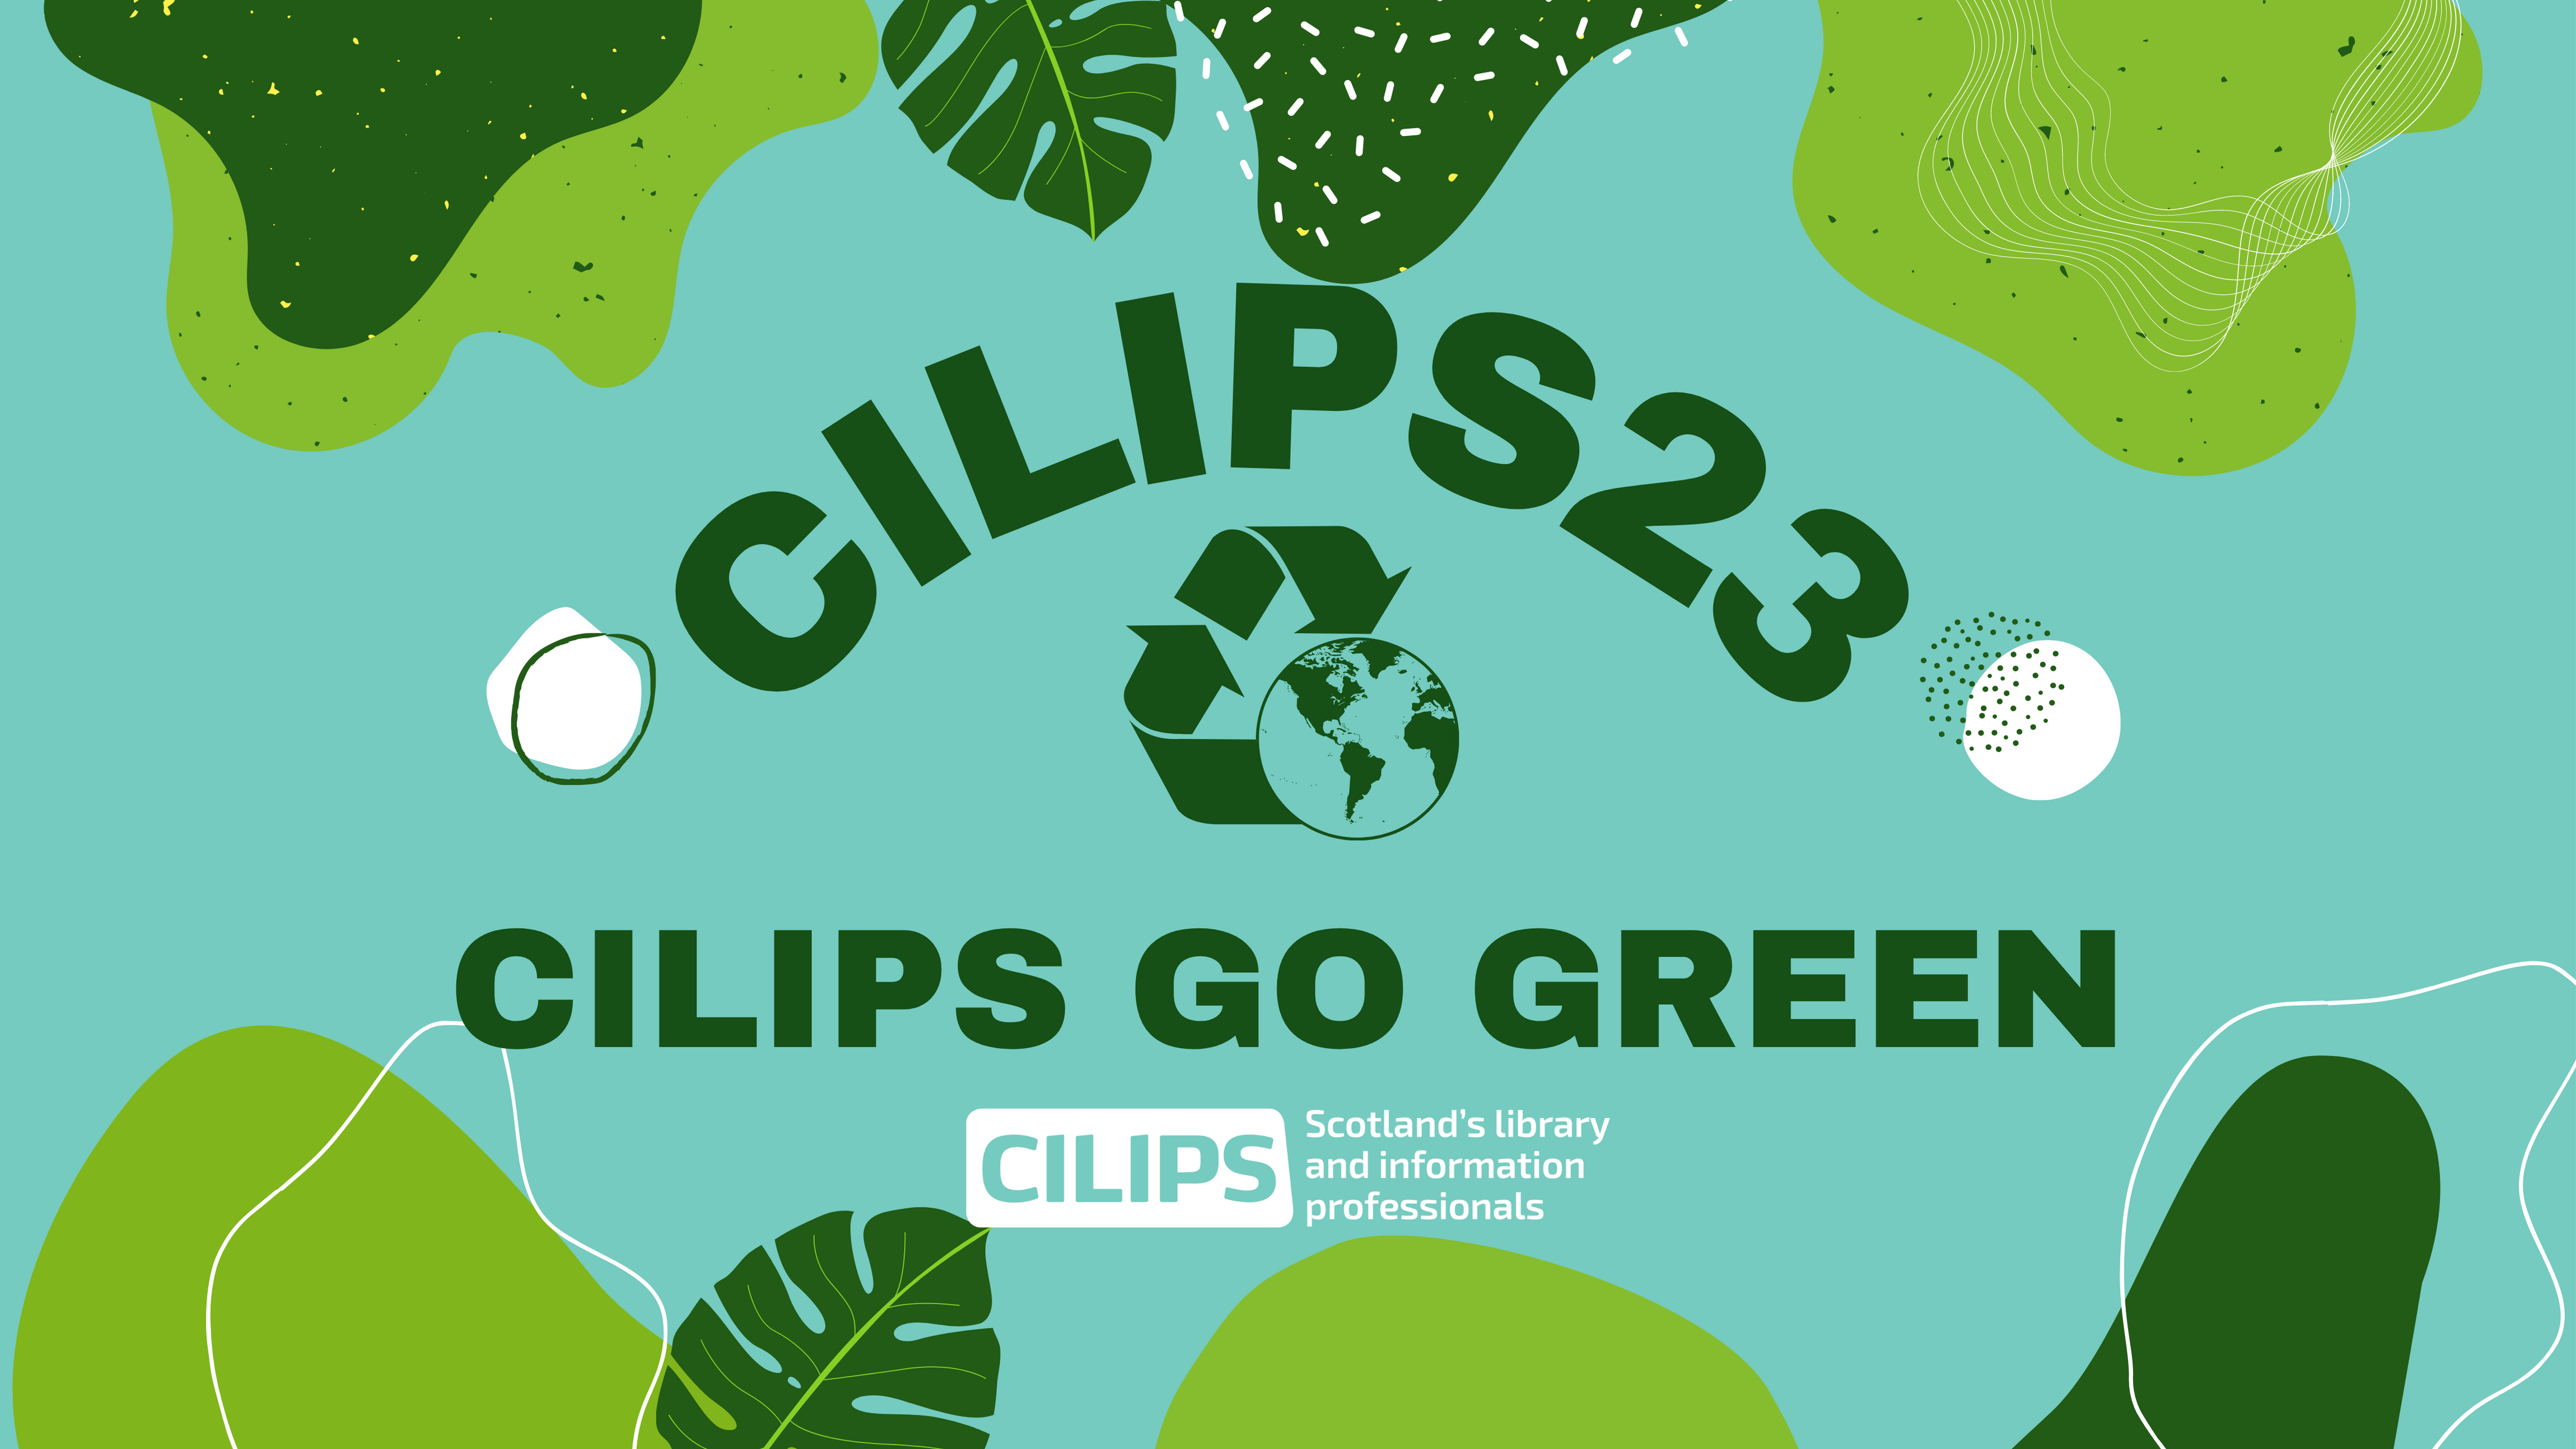 CILIPS23 X CILIPS GO GREEN. Green Visuals with blobs